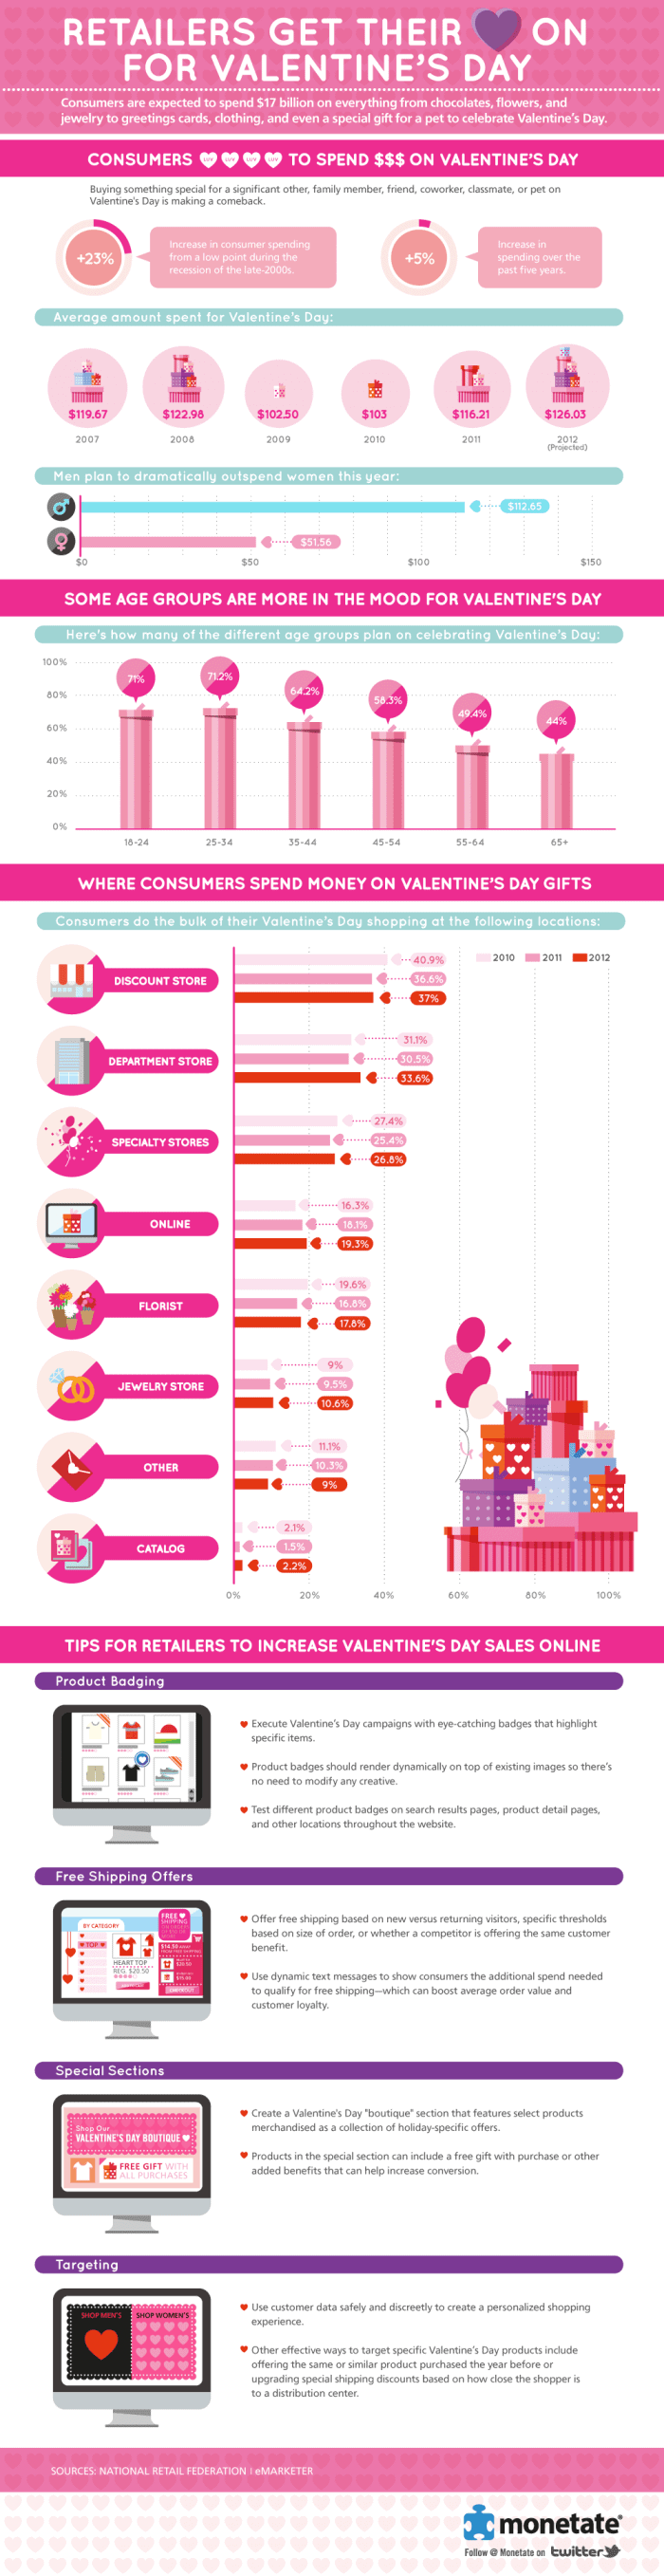 A Retailer’s Heart-On for Valentine’s Day Infographic